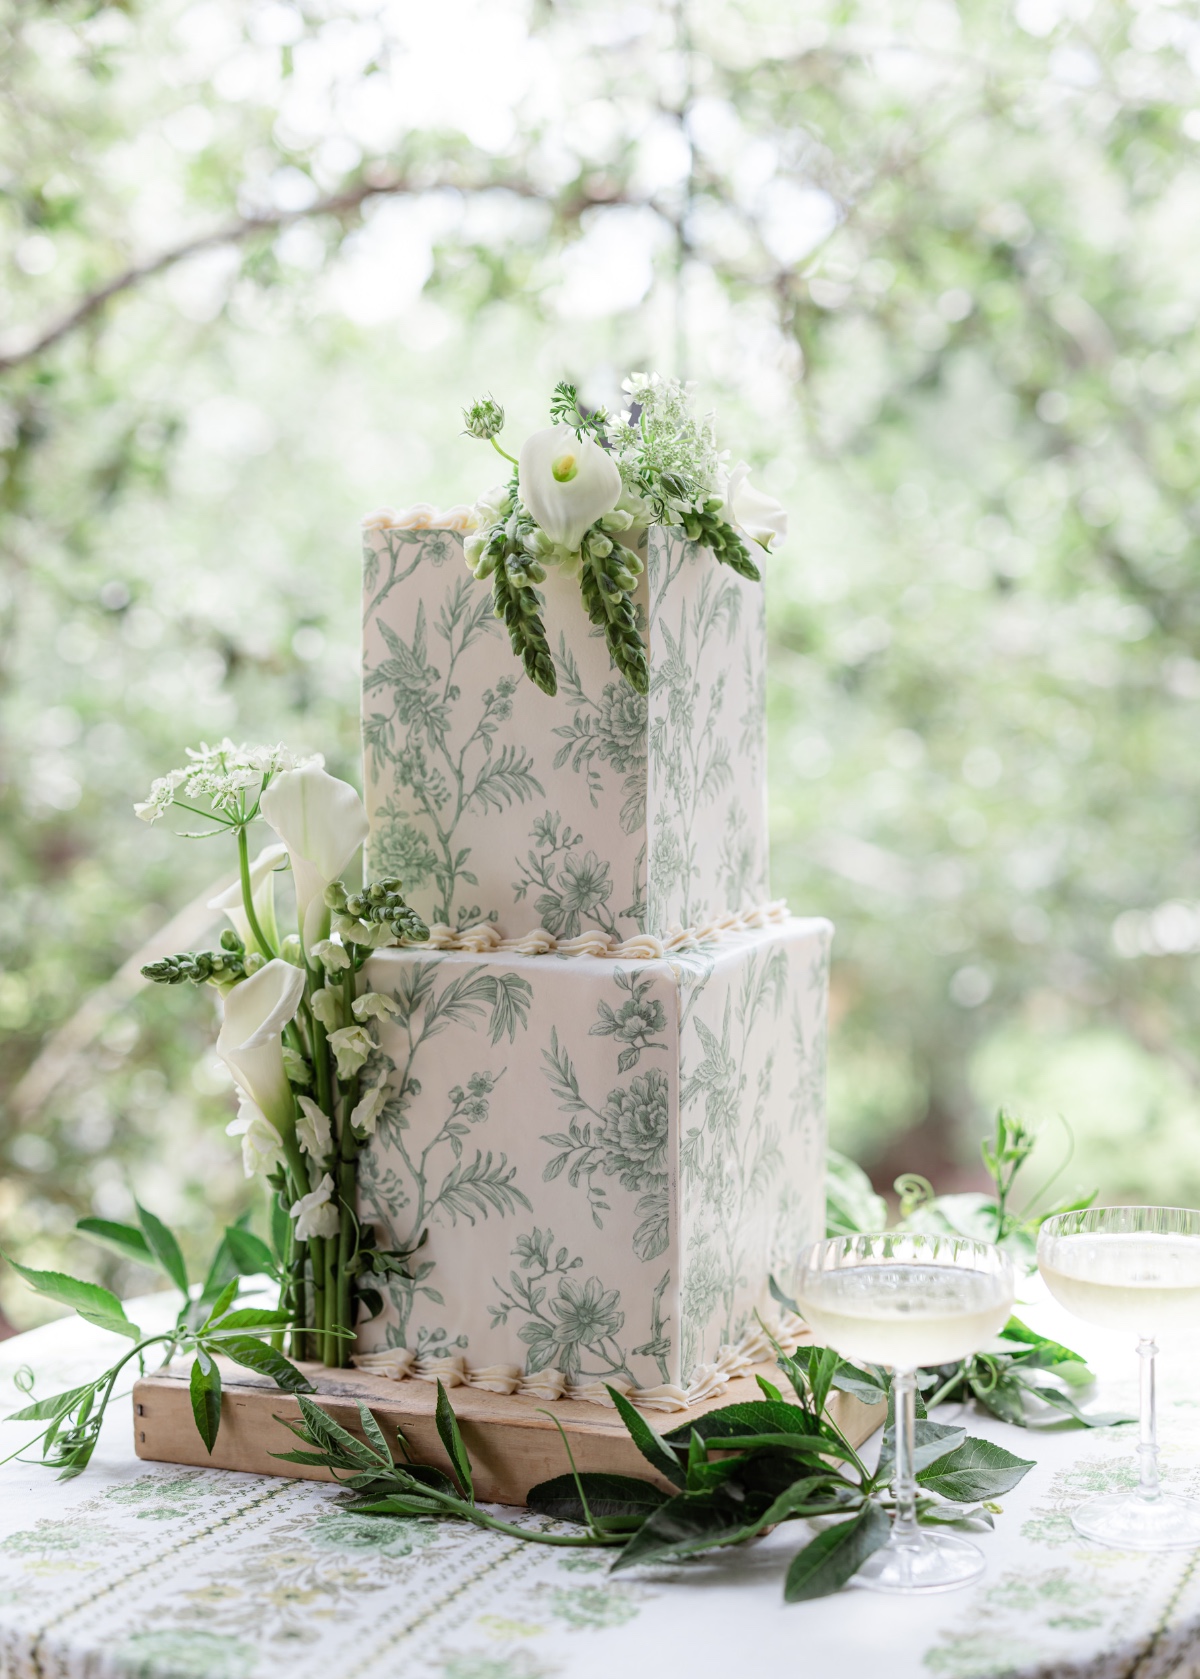 Green toile patterned wedding cake 